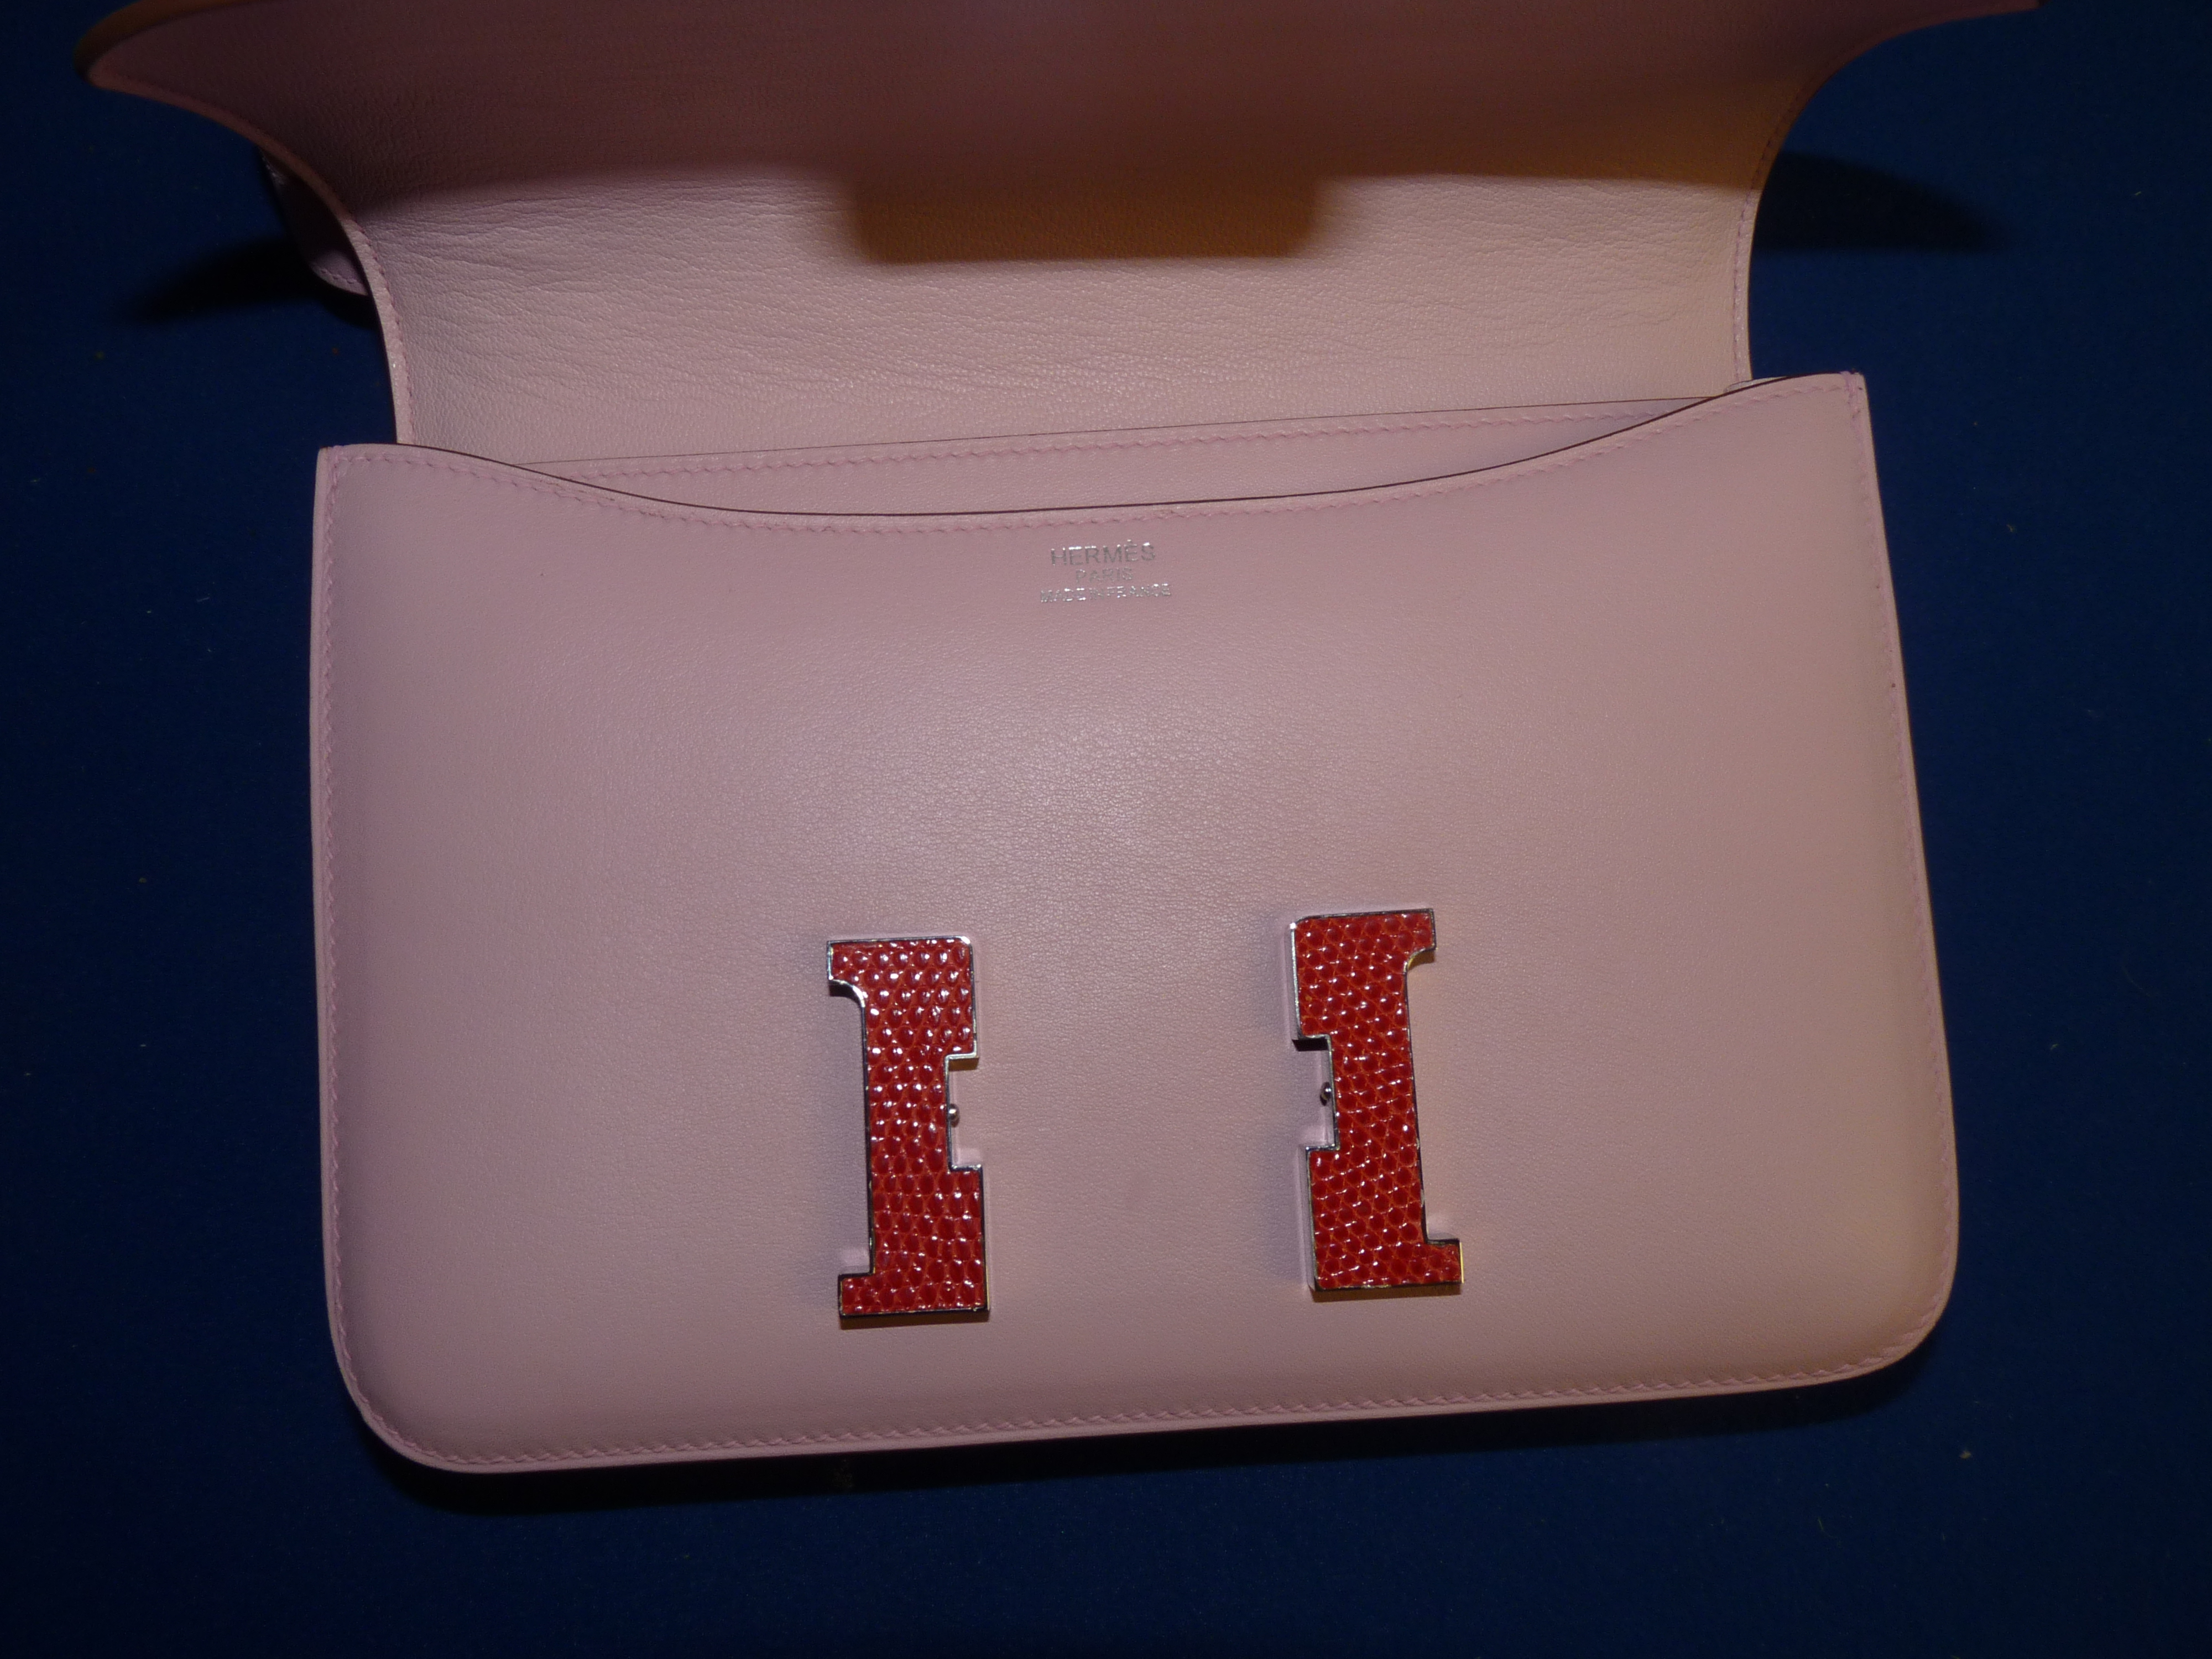 Hermes Constance handbag 24cm in pink with box and bag etc.Marked GLY745 - Image 3 of 11